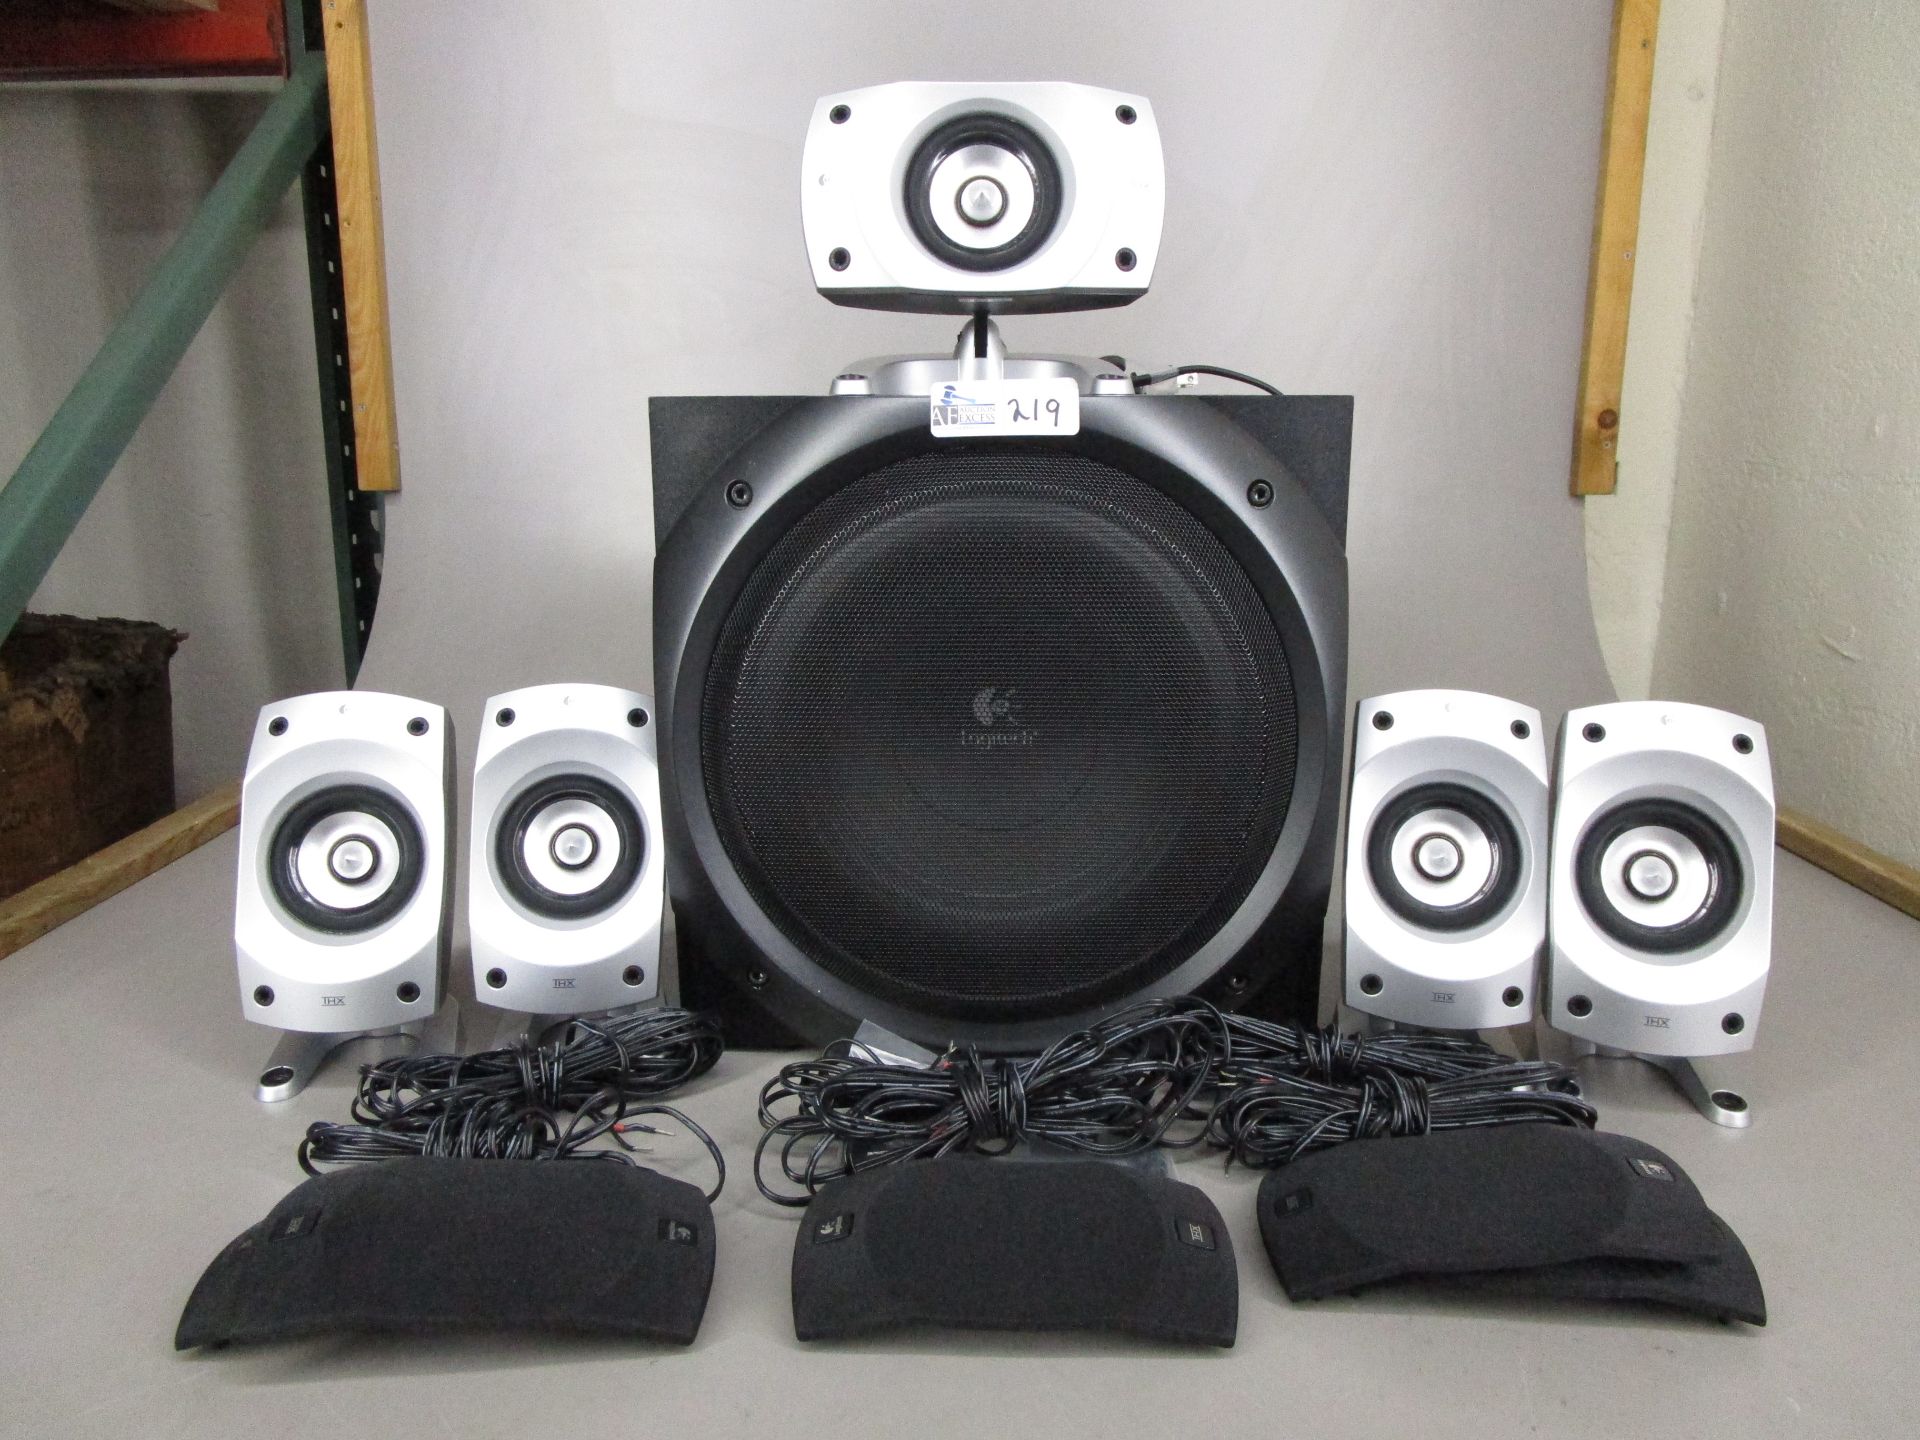 LOGITECH Z-5500 SUB WOOFER SURROUND SYSTEM IN ORIGINAL BOX(MISSING PIECES) - Image 2 of 3